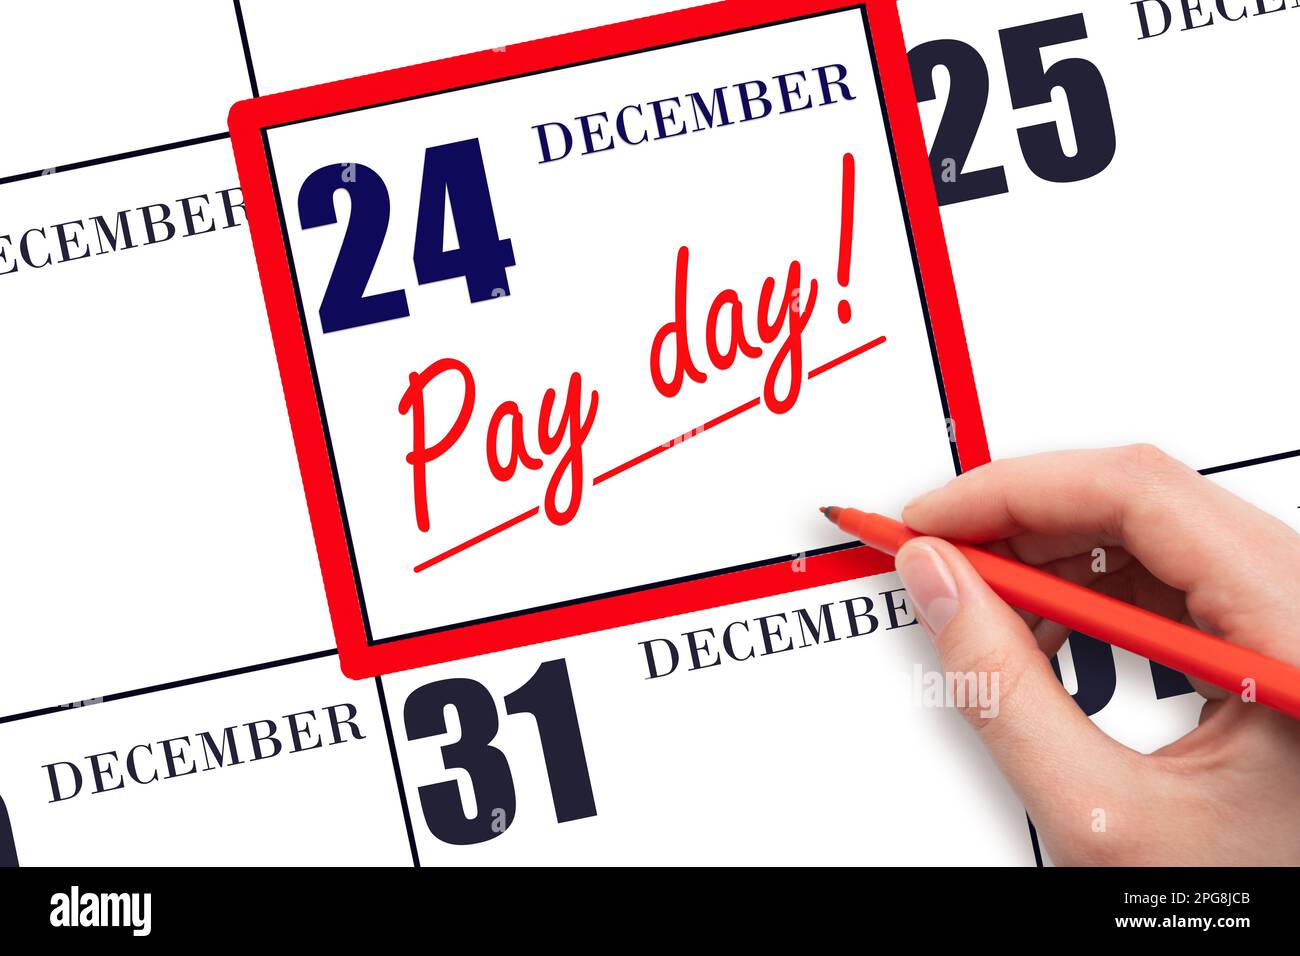 24th day of December. Hand writing text PAY DATE on calendar date December 24 and underline it. Payment due date. Reminder concept of payment. Winter Stock Photo